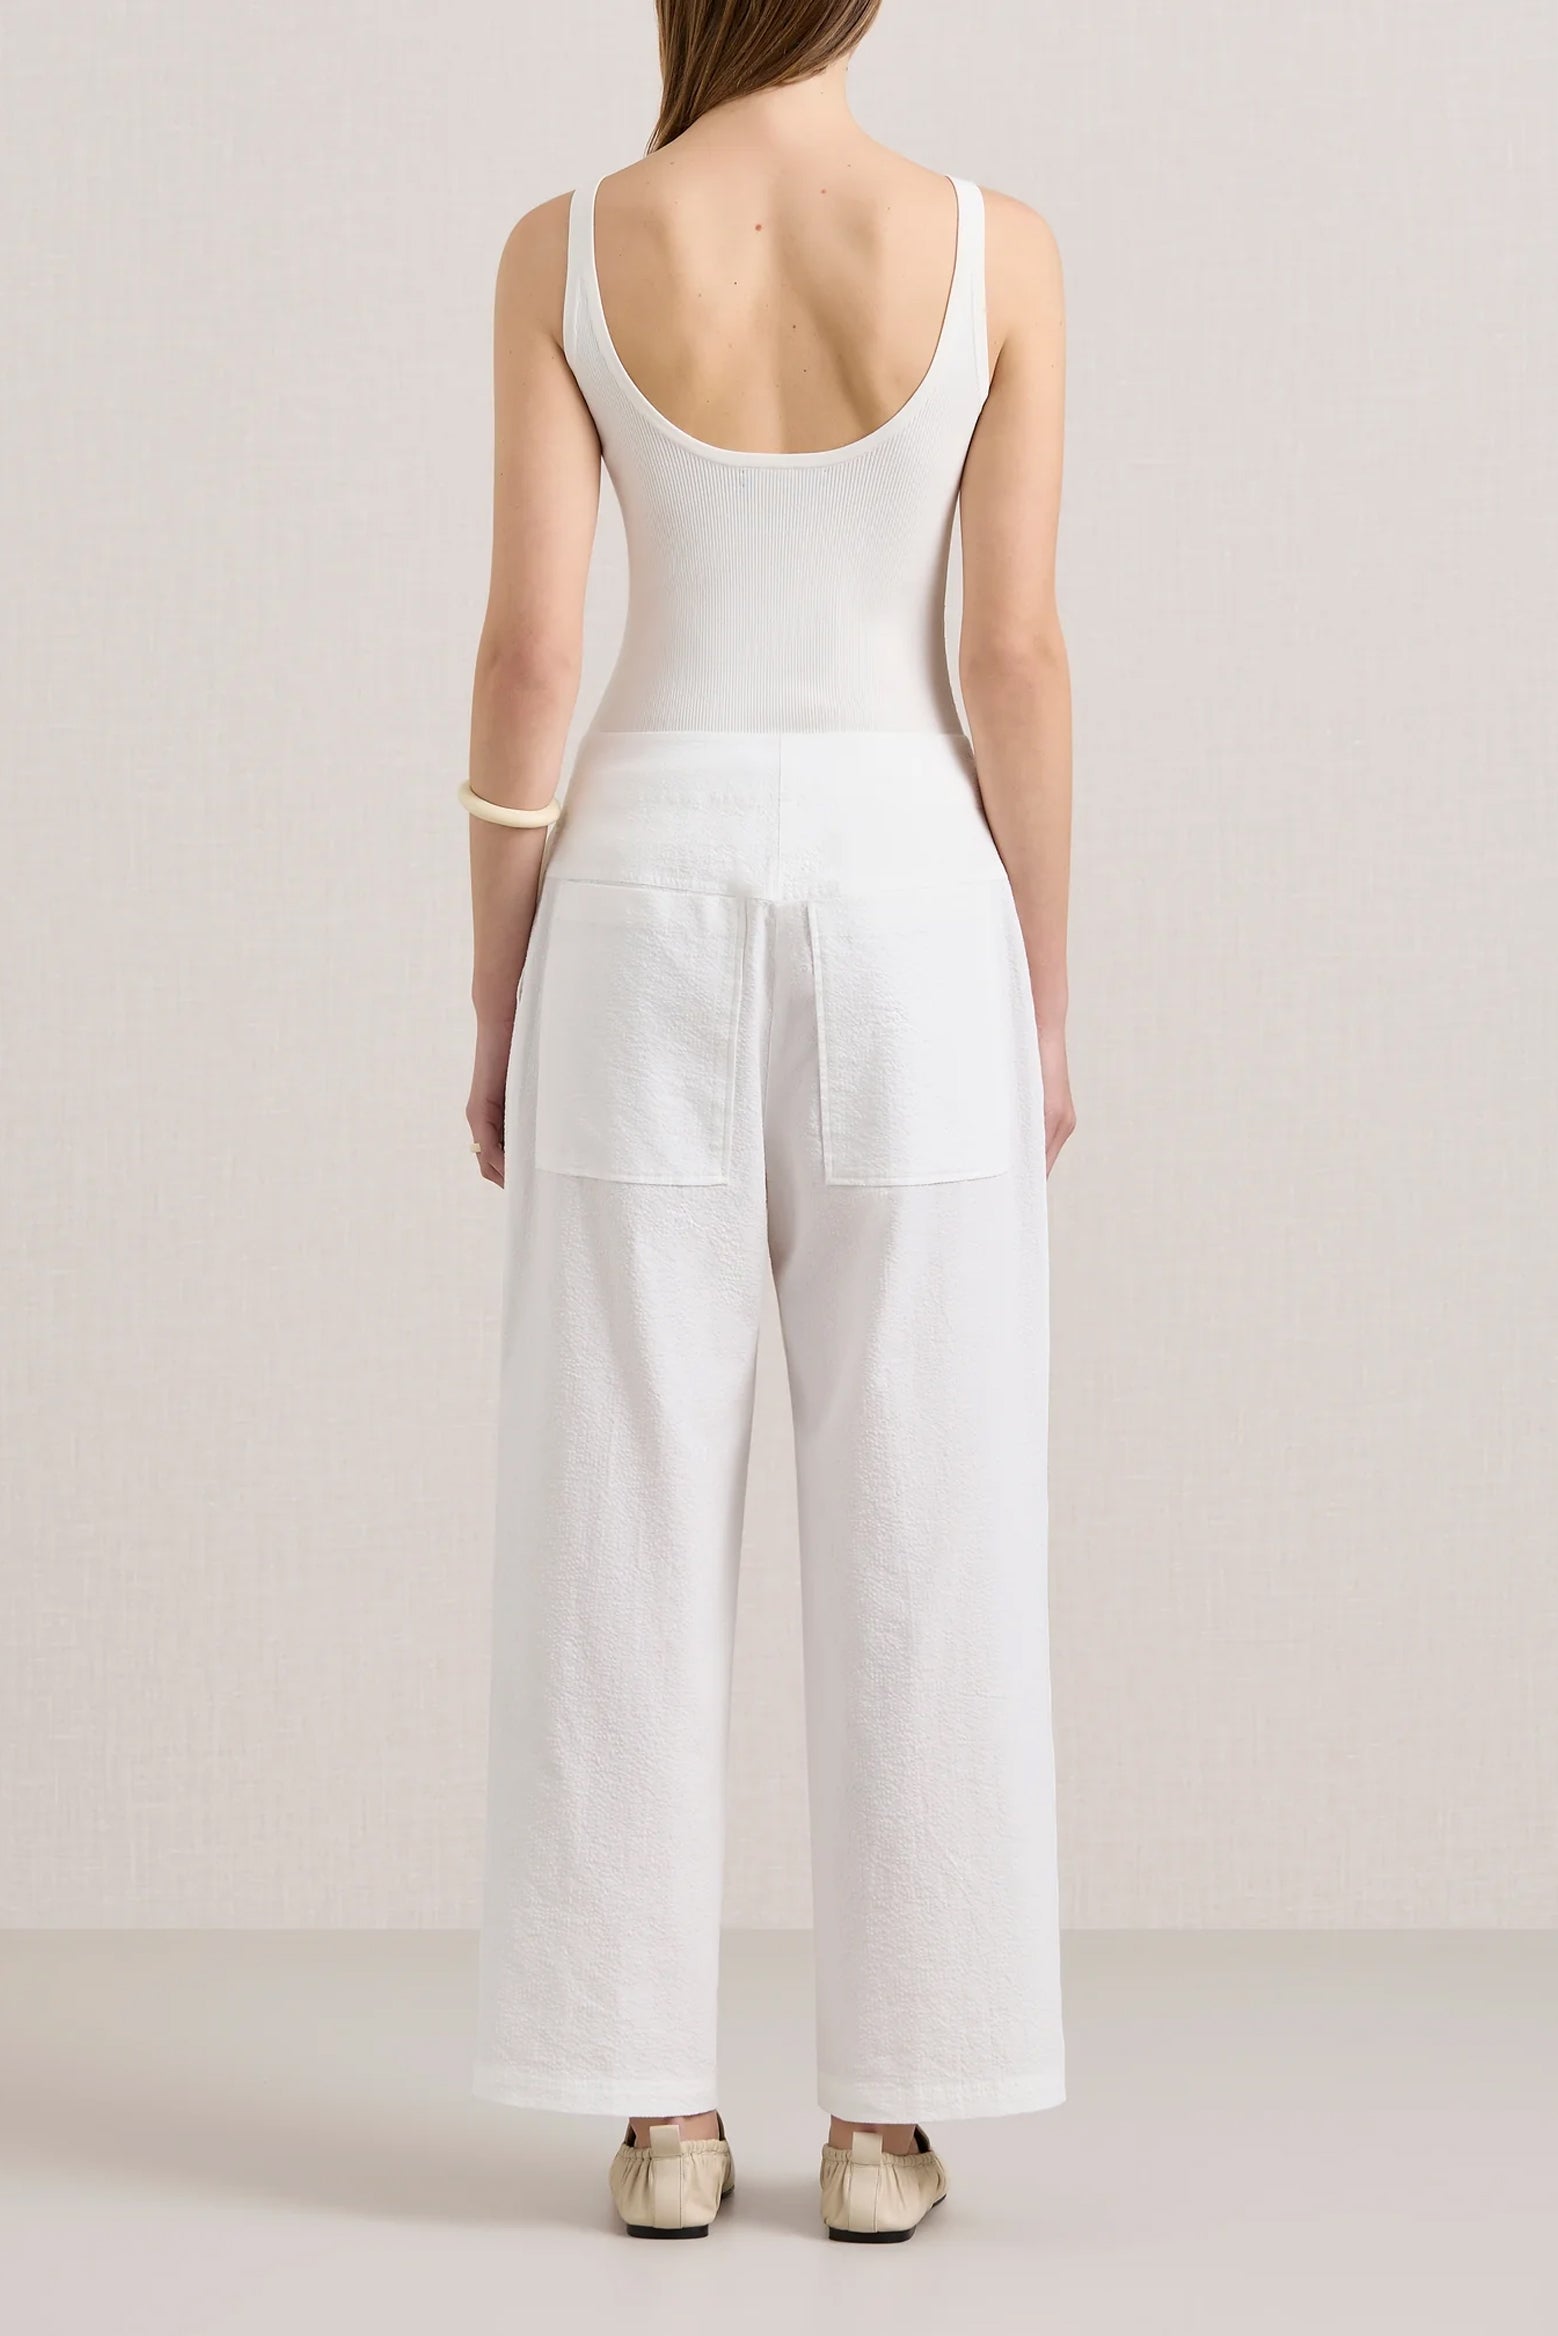 A.Emery Verna Tank in Parchment available at The New Trend Australia.